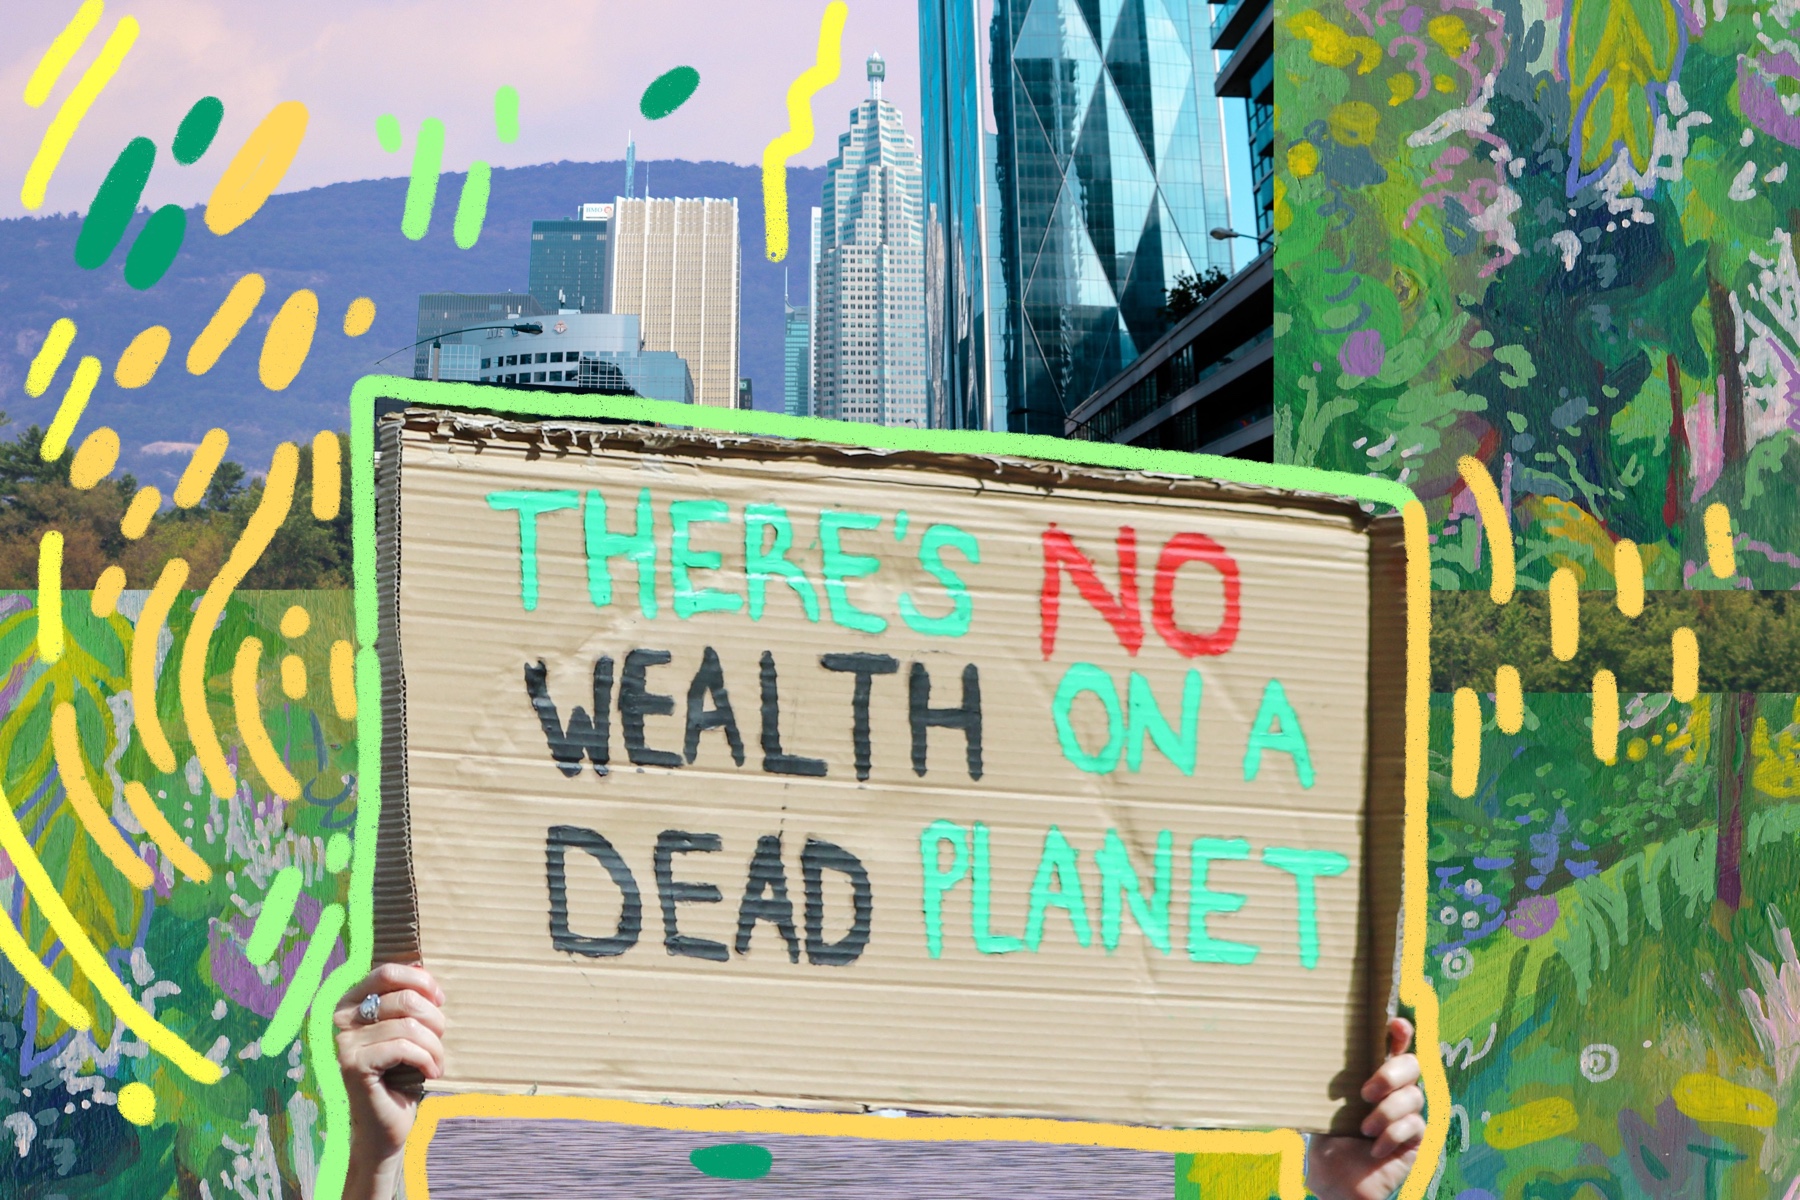 A sign that says "There's no wealth on a dead planet."